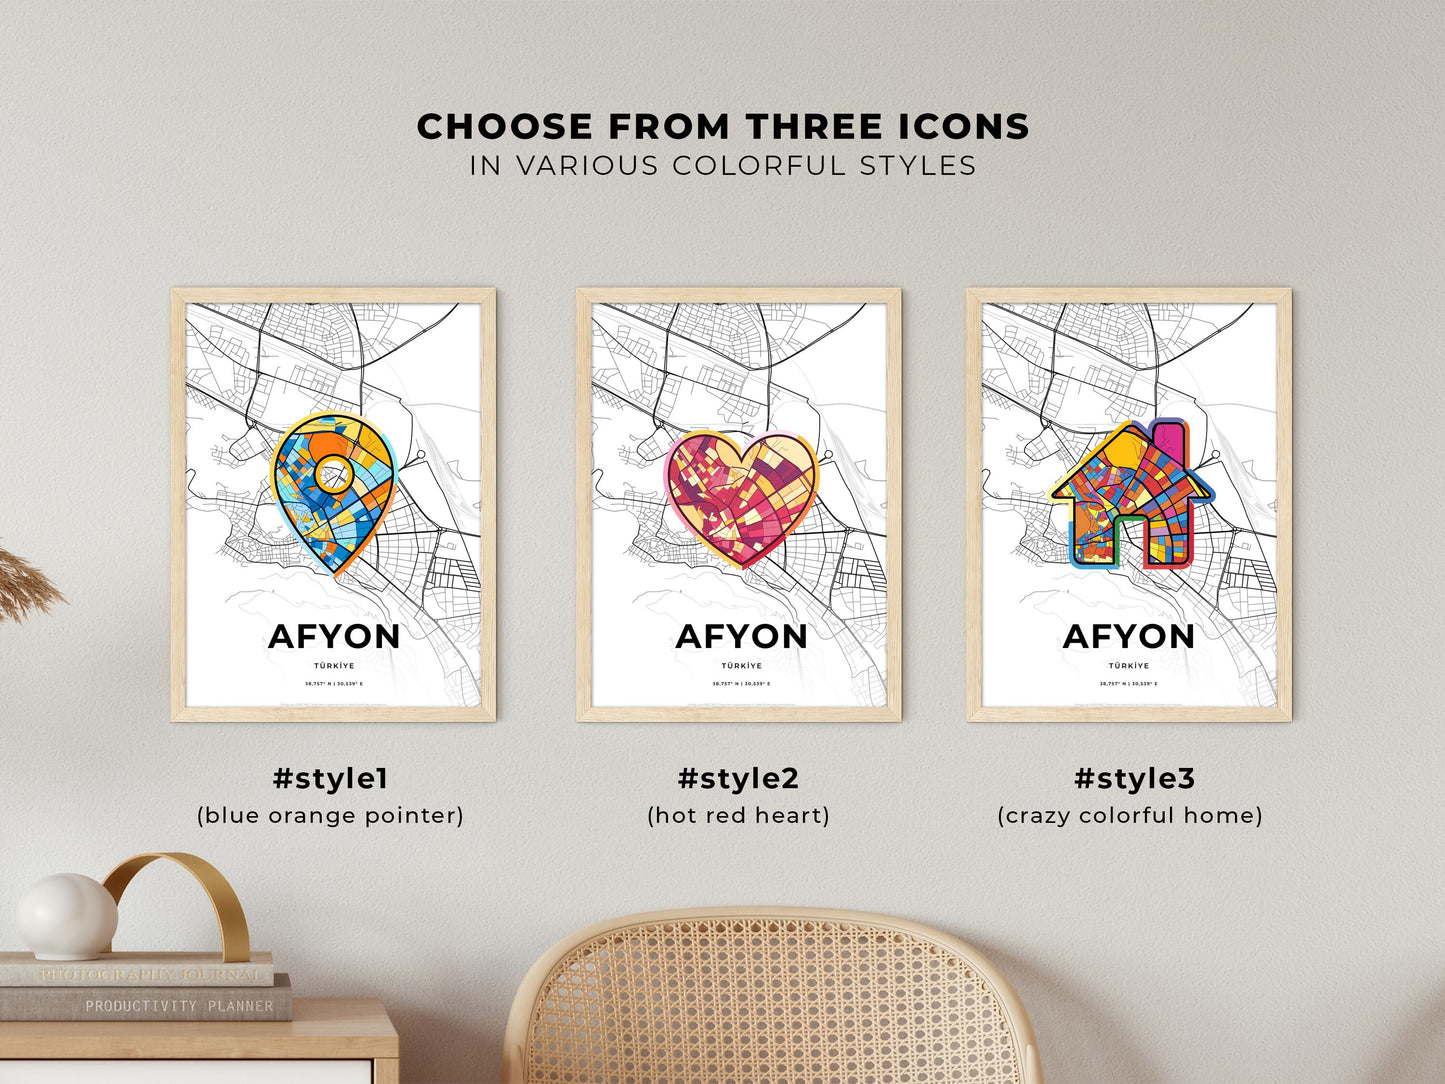 AFYON TURKEY minimal art map with a colorful icon. Where it all began, Couple map gift.